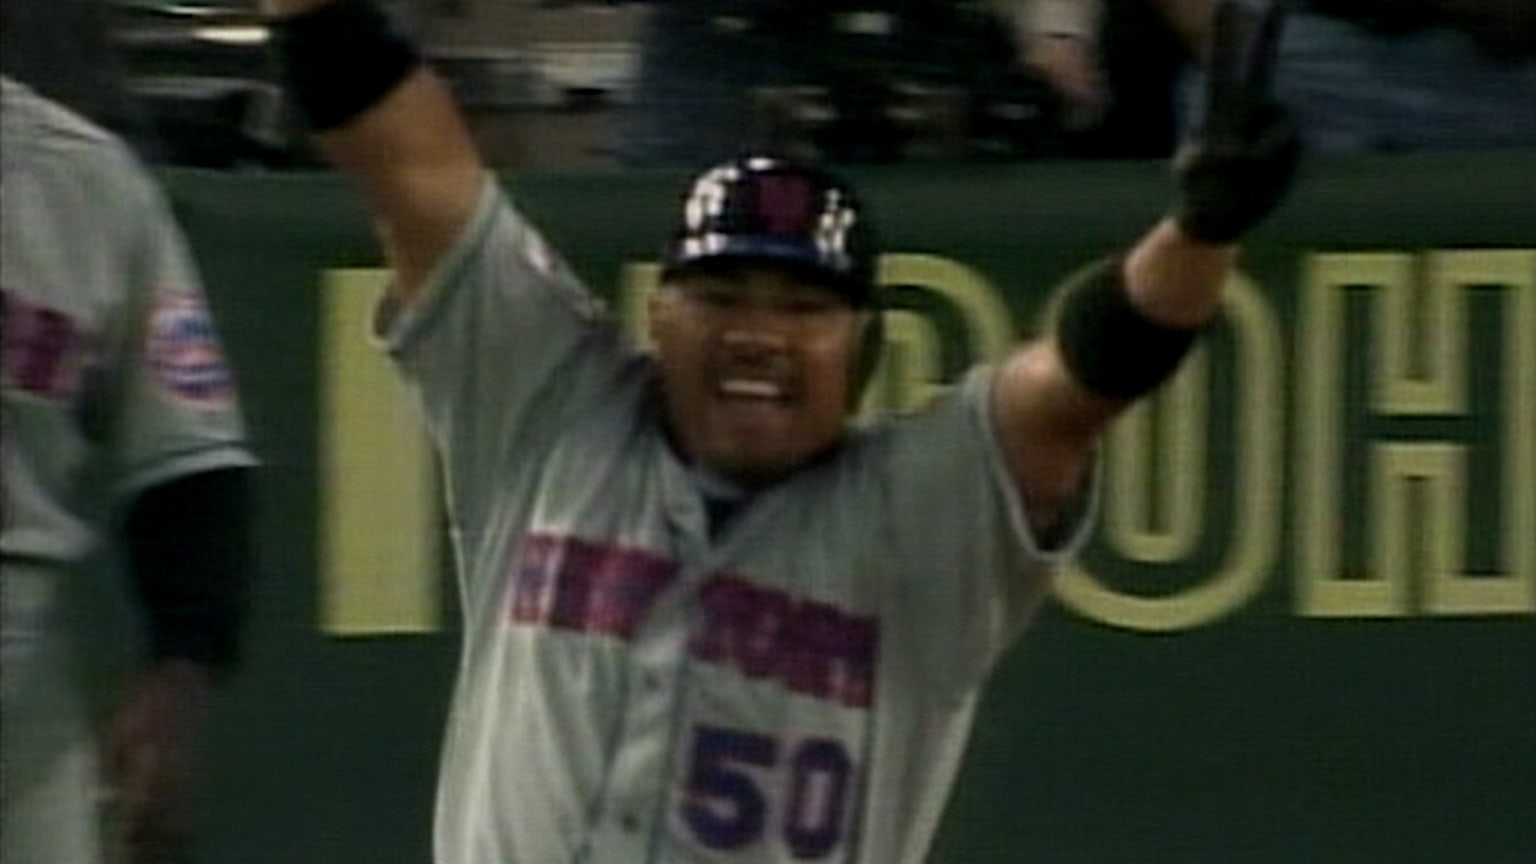 Agbayani's grand slam lifts the Mets 